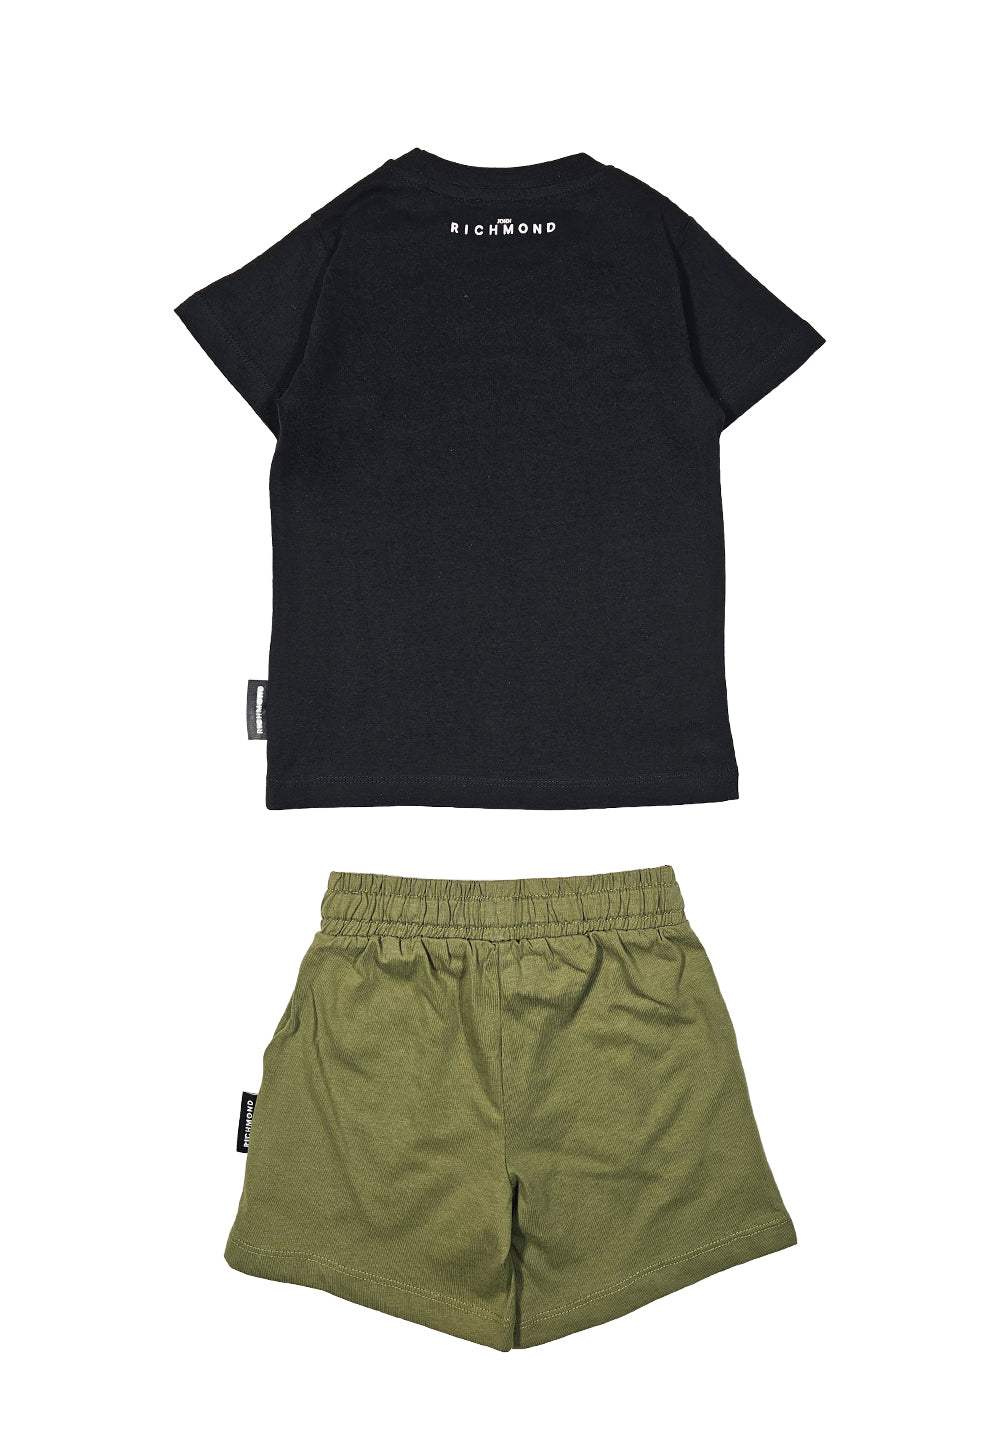 Black-green suit for boys